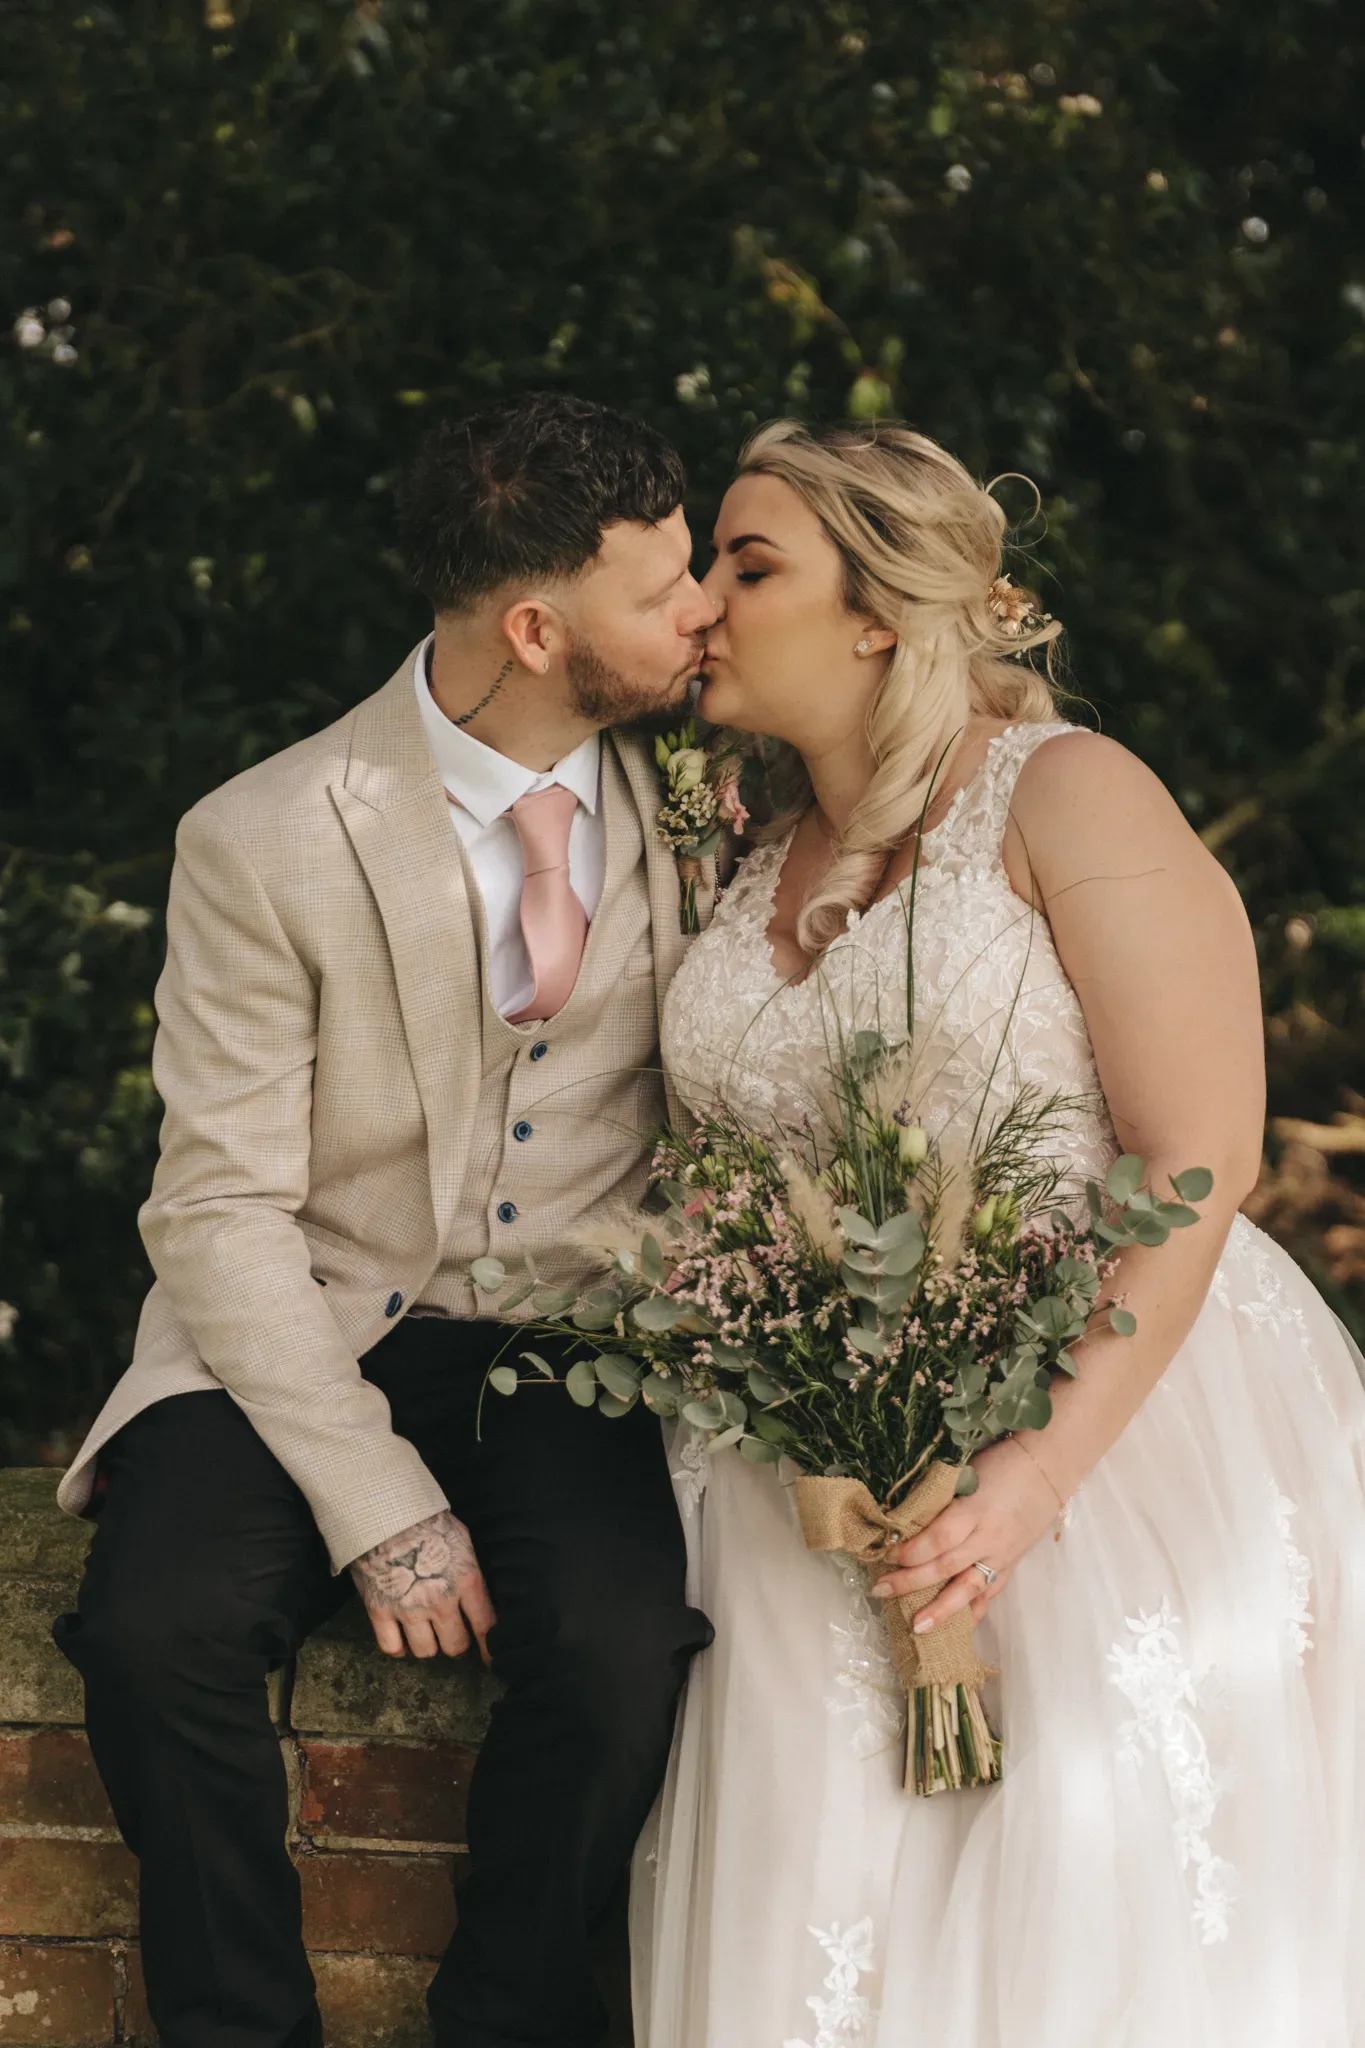 A bride and groom sharing a kiss while sitting on a brick wall. the bride holds a bouquet of green and white flowers, and both are dressed in elegant wedding attire, the groom in a beige suit and the bride in a lace gown.